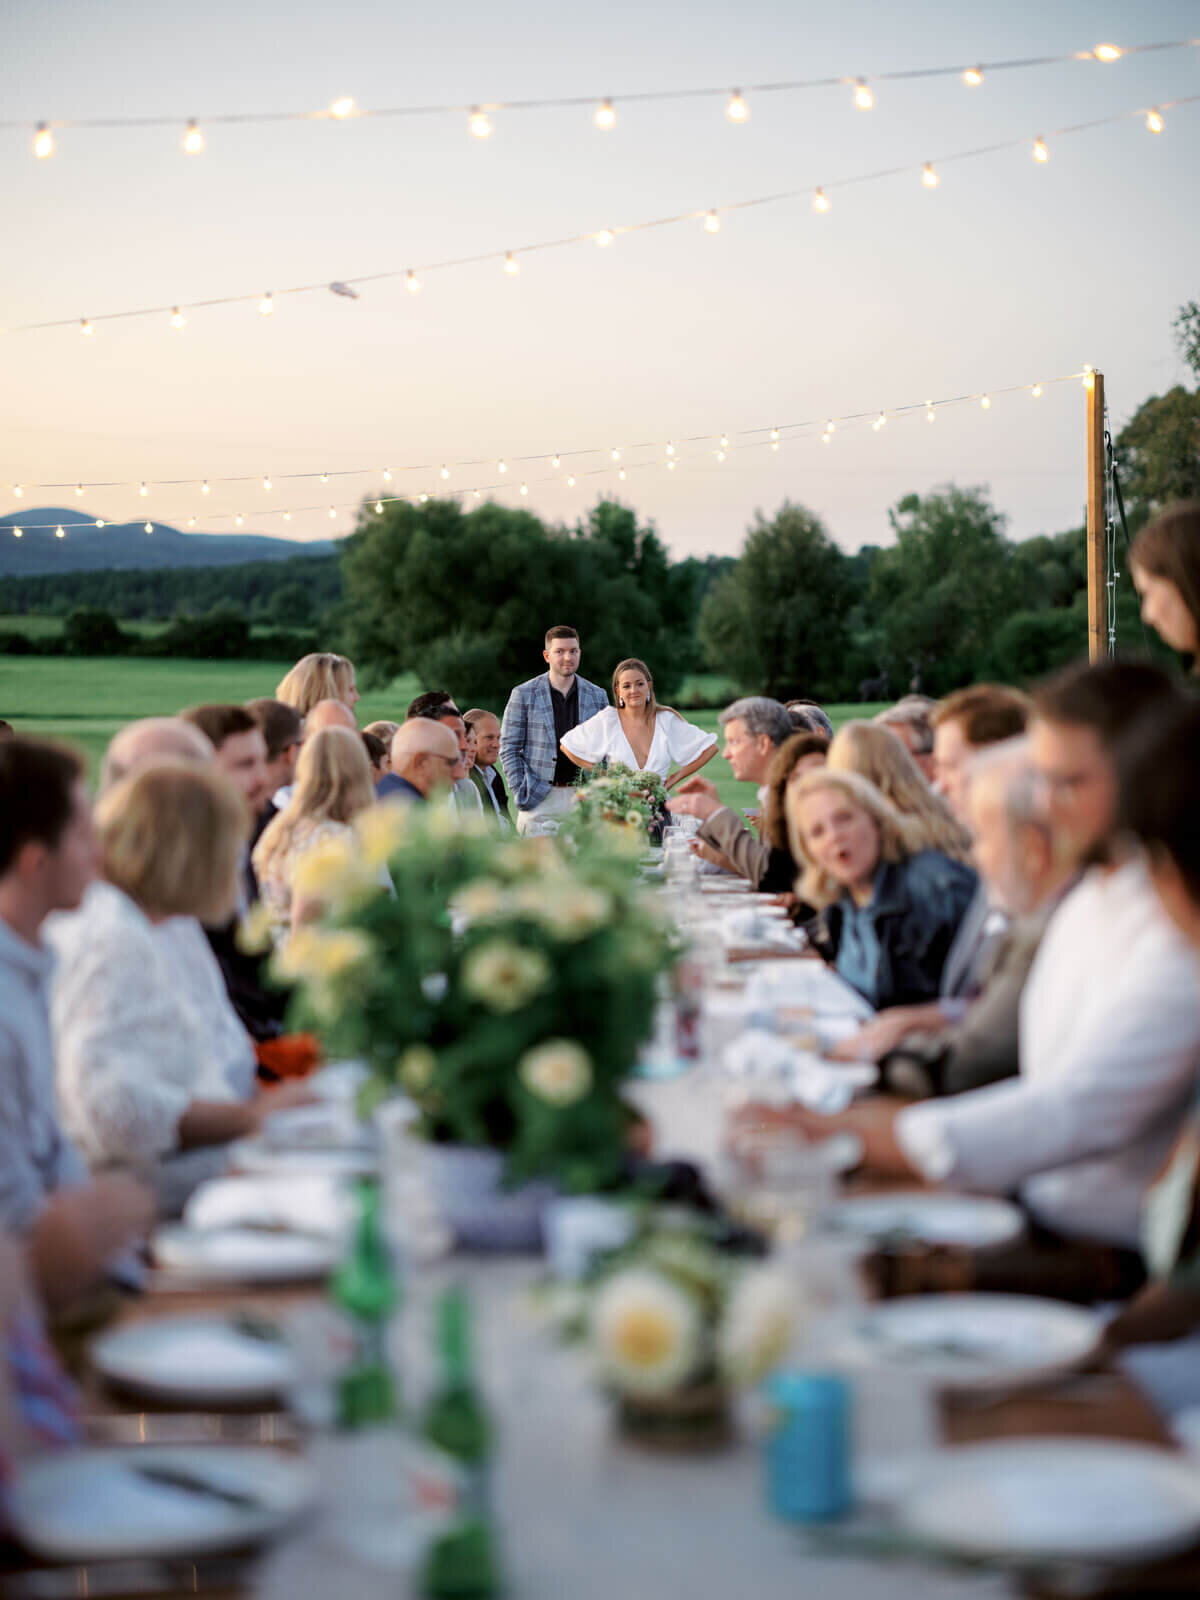 The bride and groom-to-be are with guests seated on a long dining table outdoors at Lion Rock Farms, CT. Image by Jenny Fu Studio